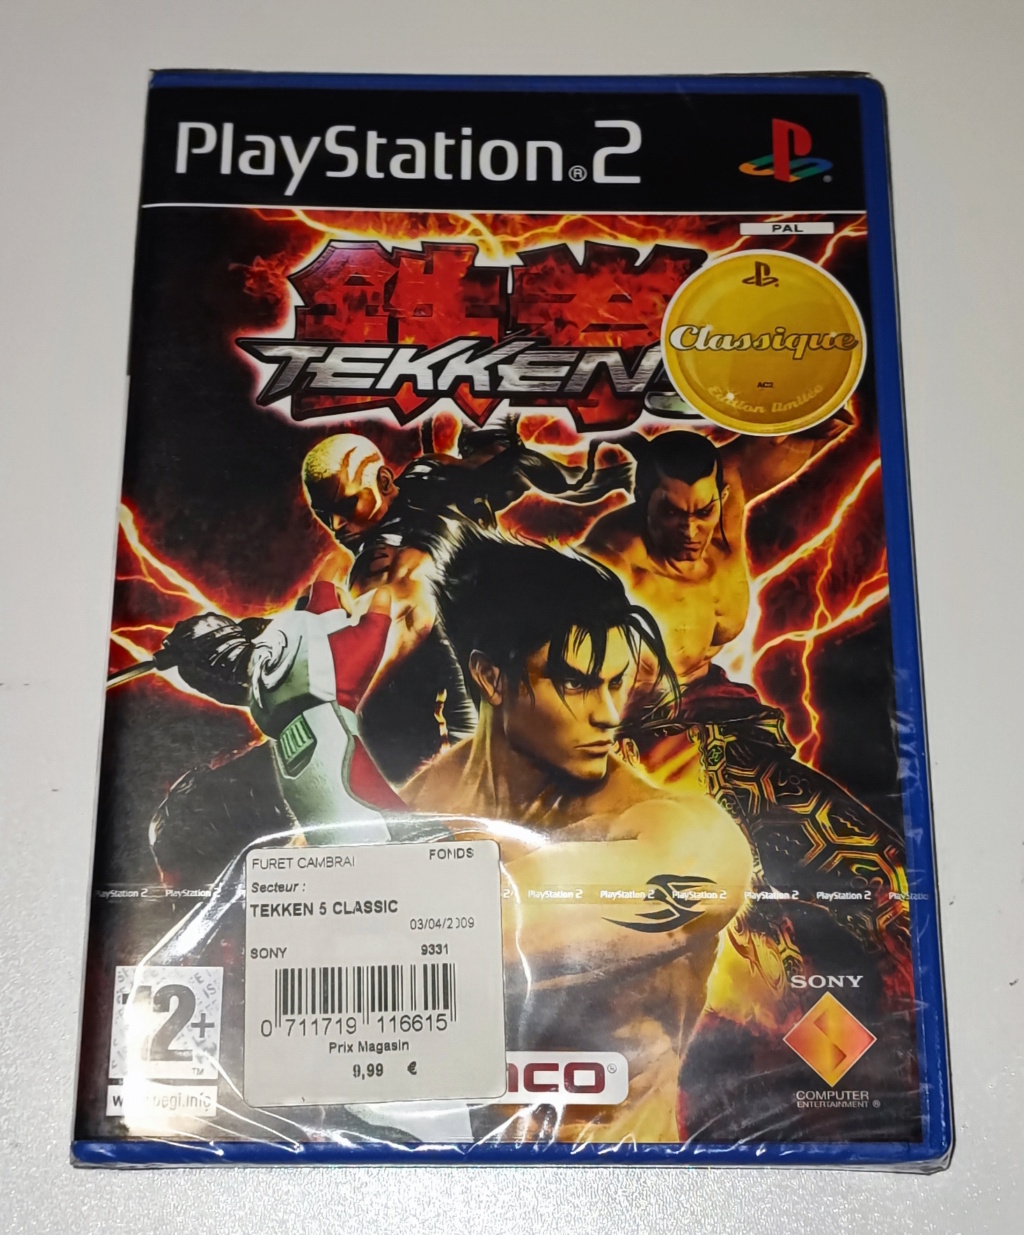 [VENDS] Collection Playstation 2 PS2 Pal Fr sous blister Ps2bs114